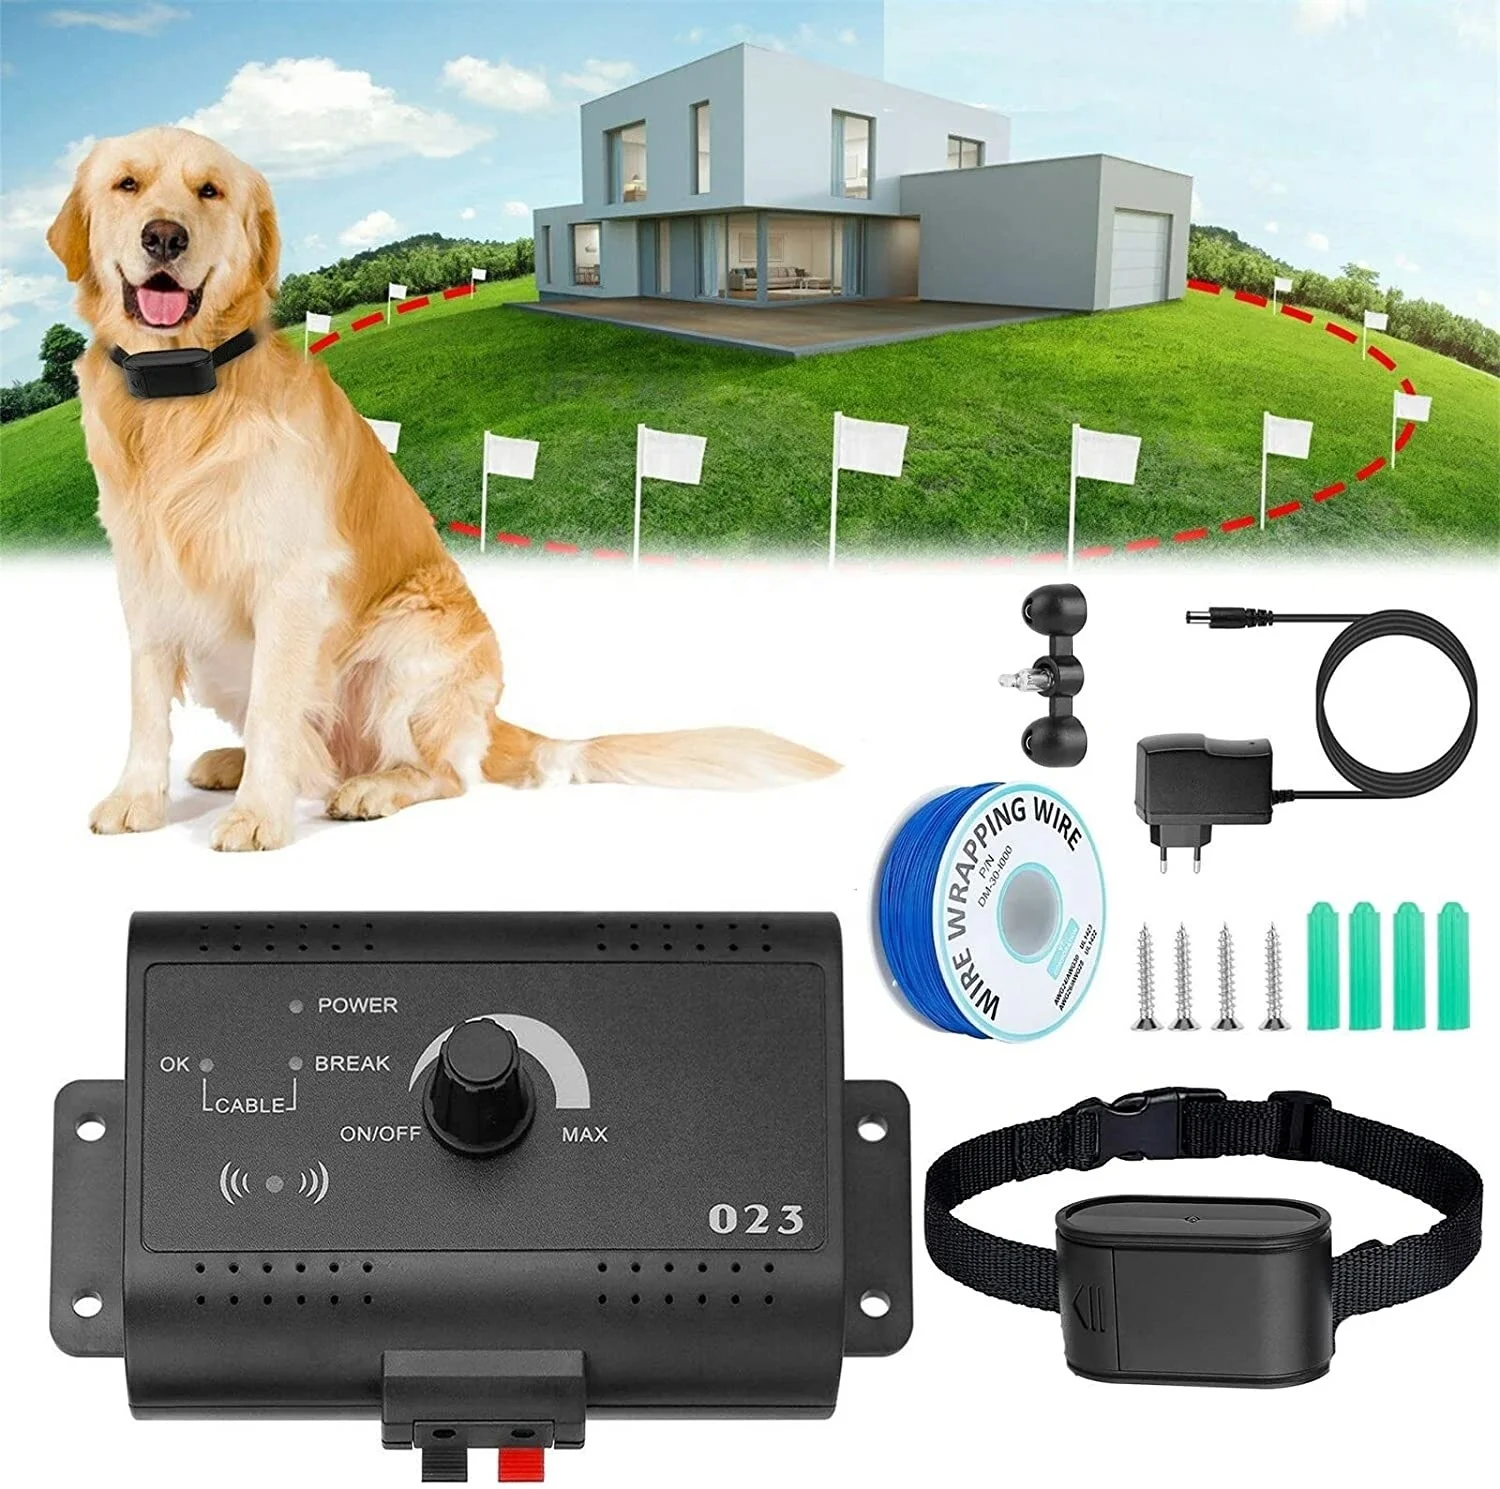 

Electric Dog Fence 023 Waterproof Training Collar Sound Shocked Electronic Pet Fence System Containment for 1/2/3 Dog